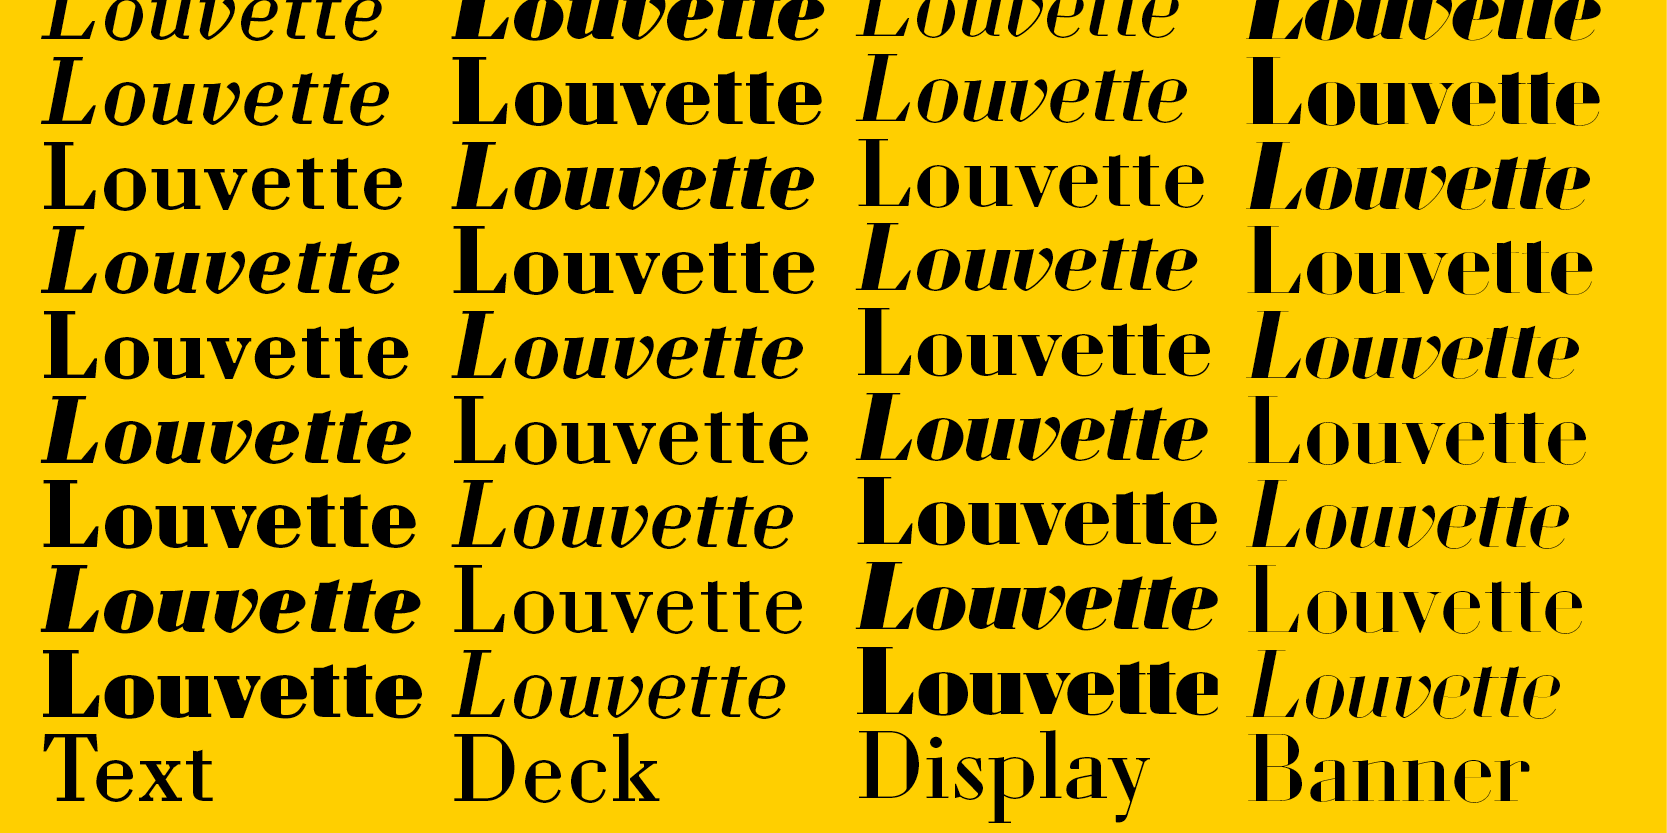 Card displaying Louvette Display typeface in various styles